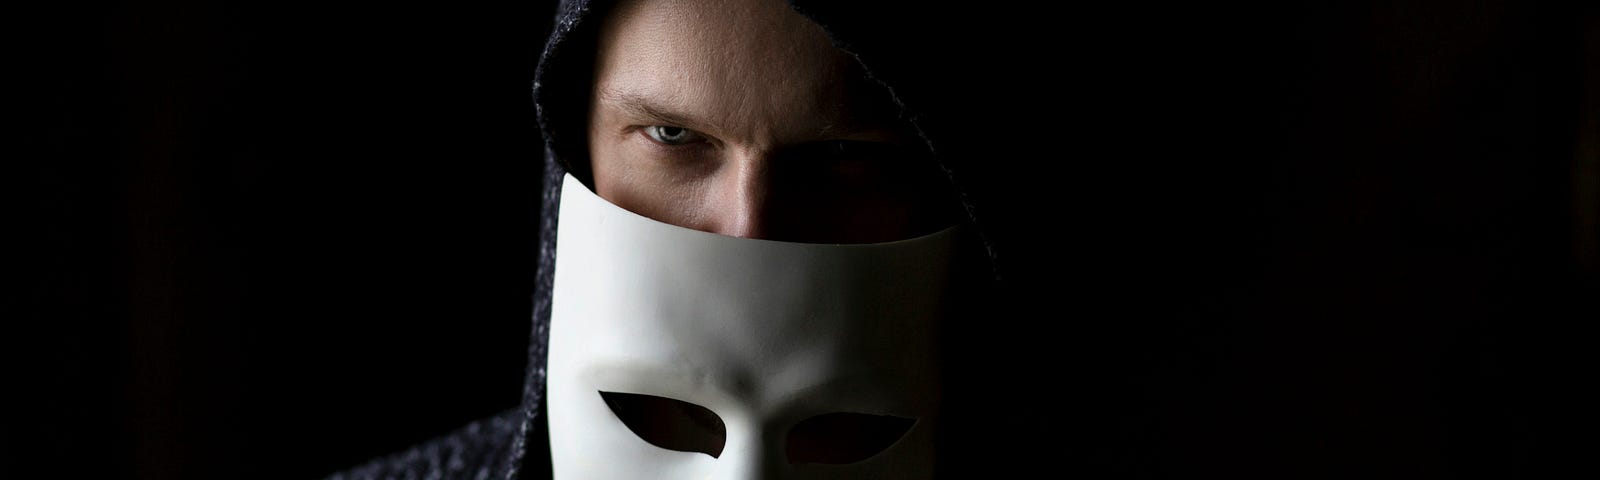 A man in a dark hoody peering over a white mask